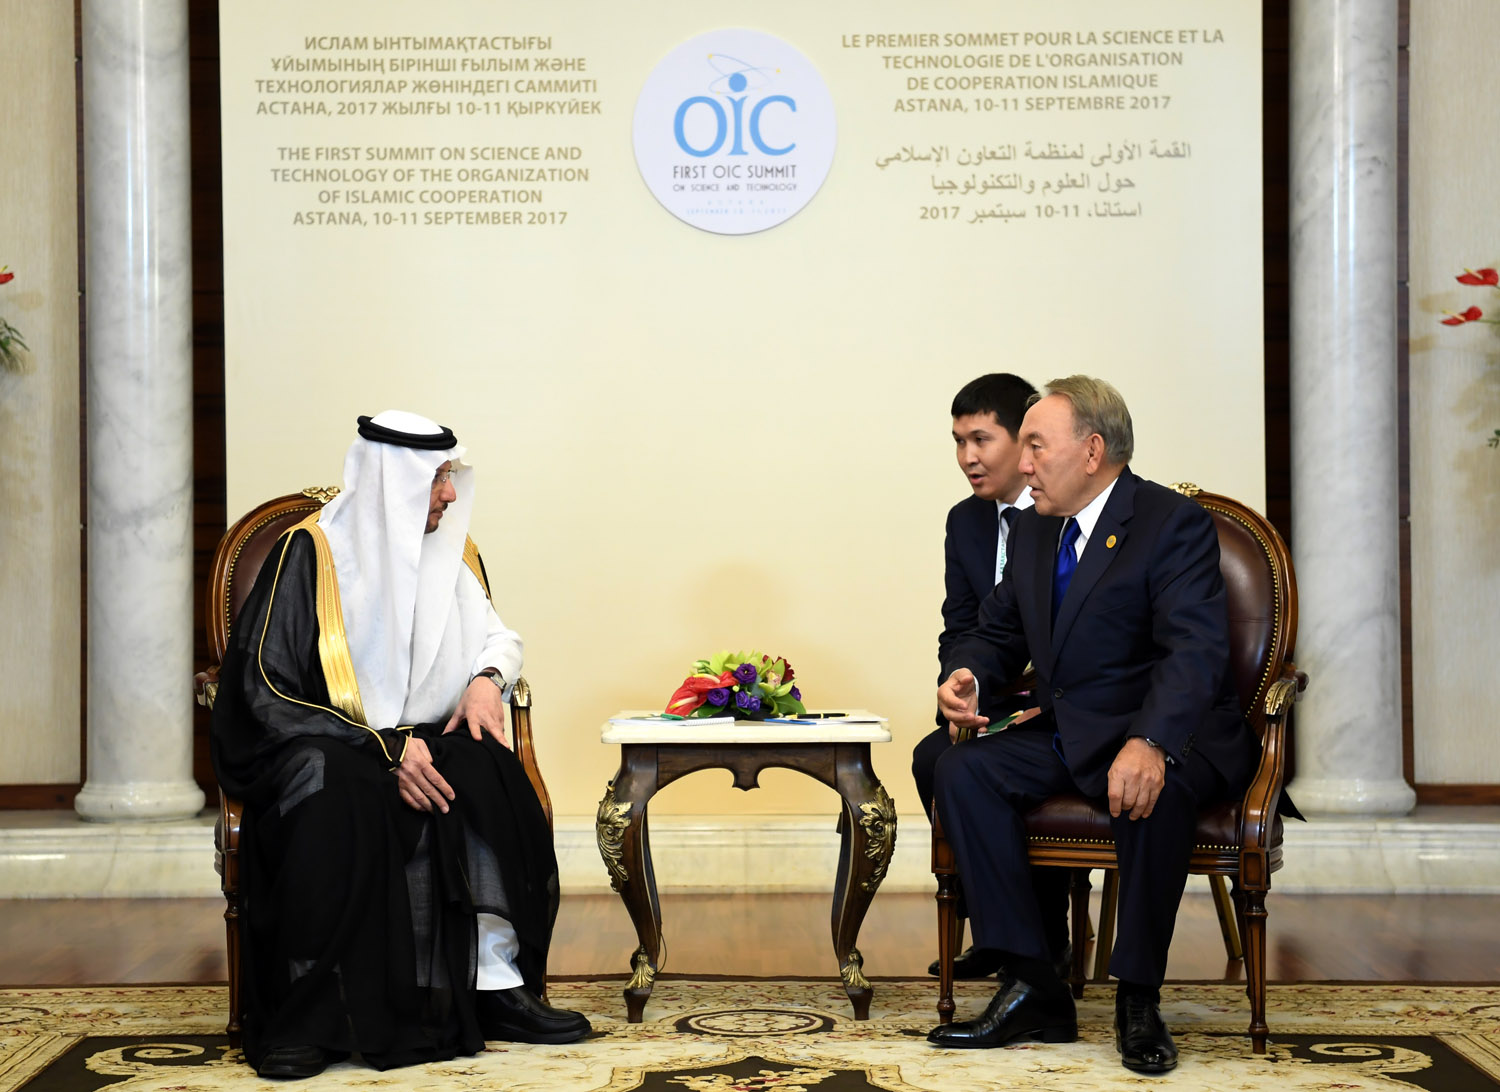 President Nazarbayev met with the OIC Secretary General